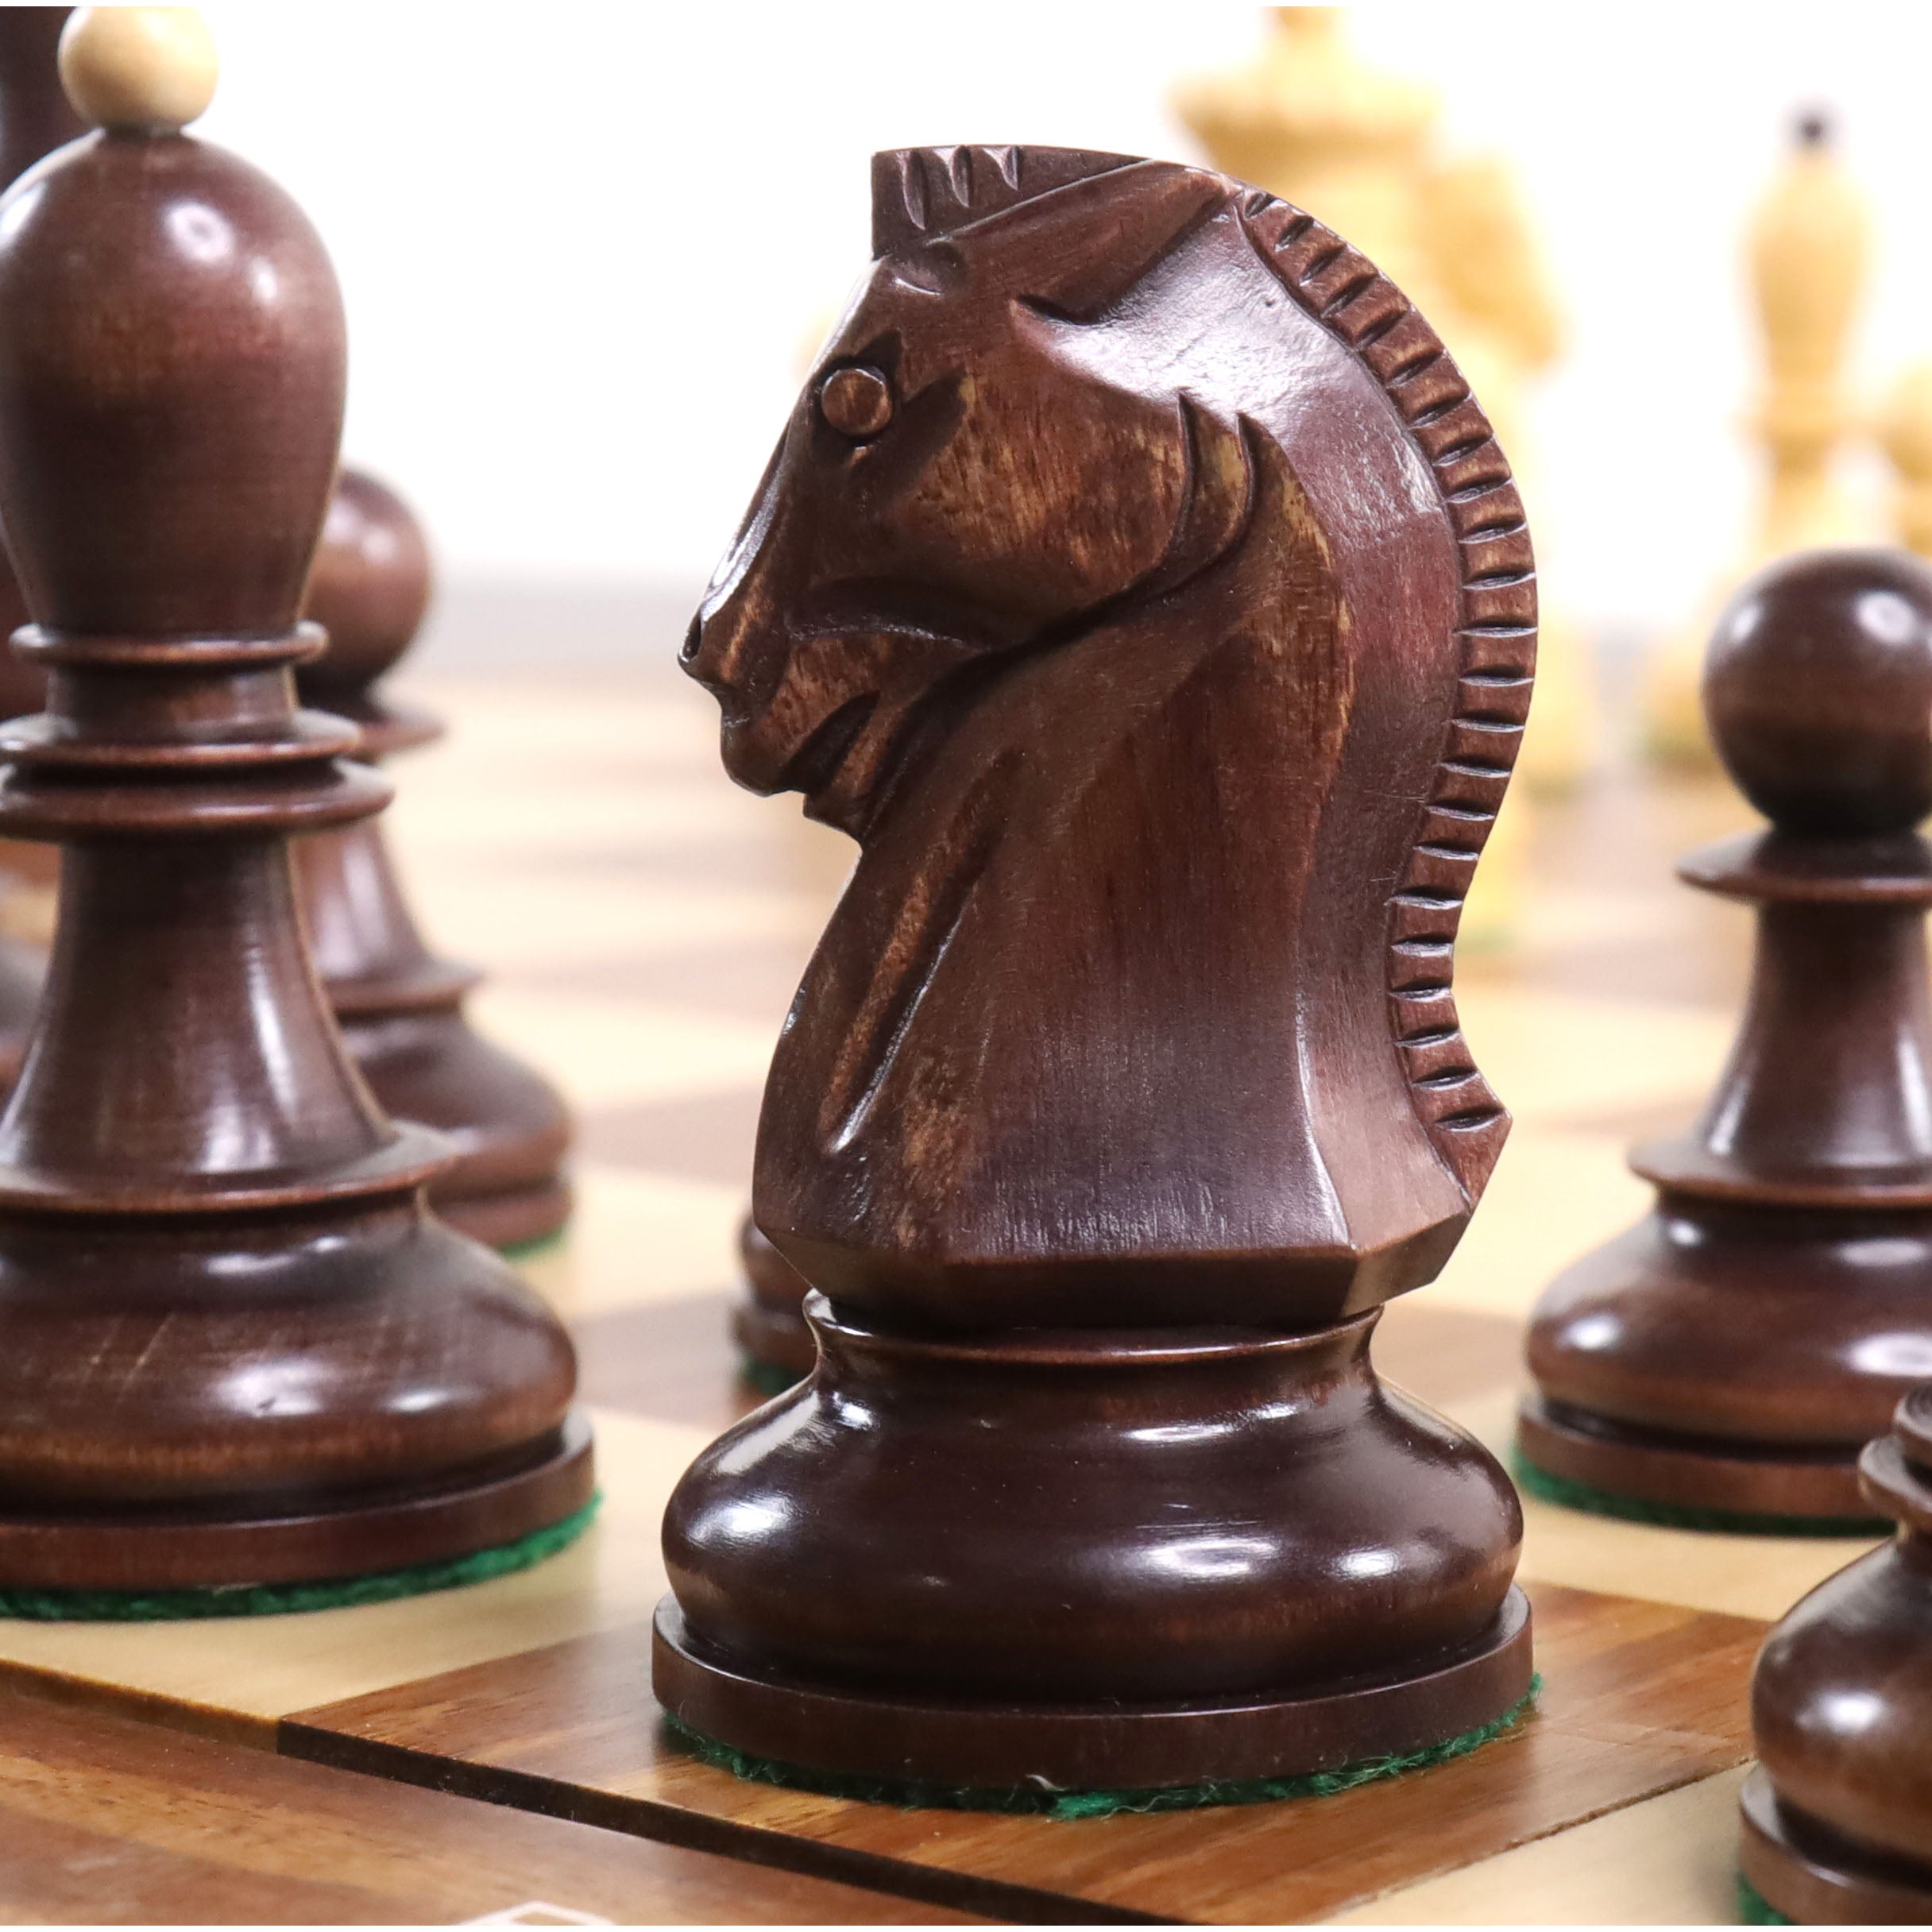 A Queen for a King - One of my Favorite Bobby Fischer Games 